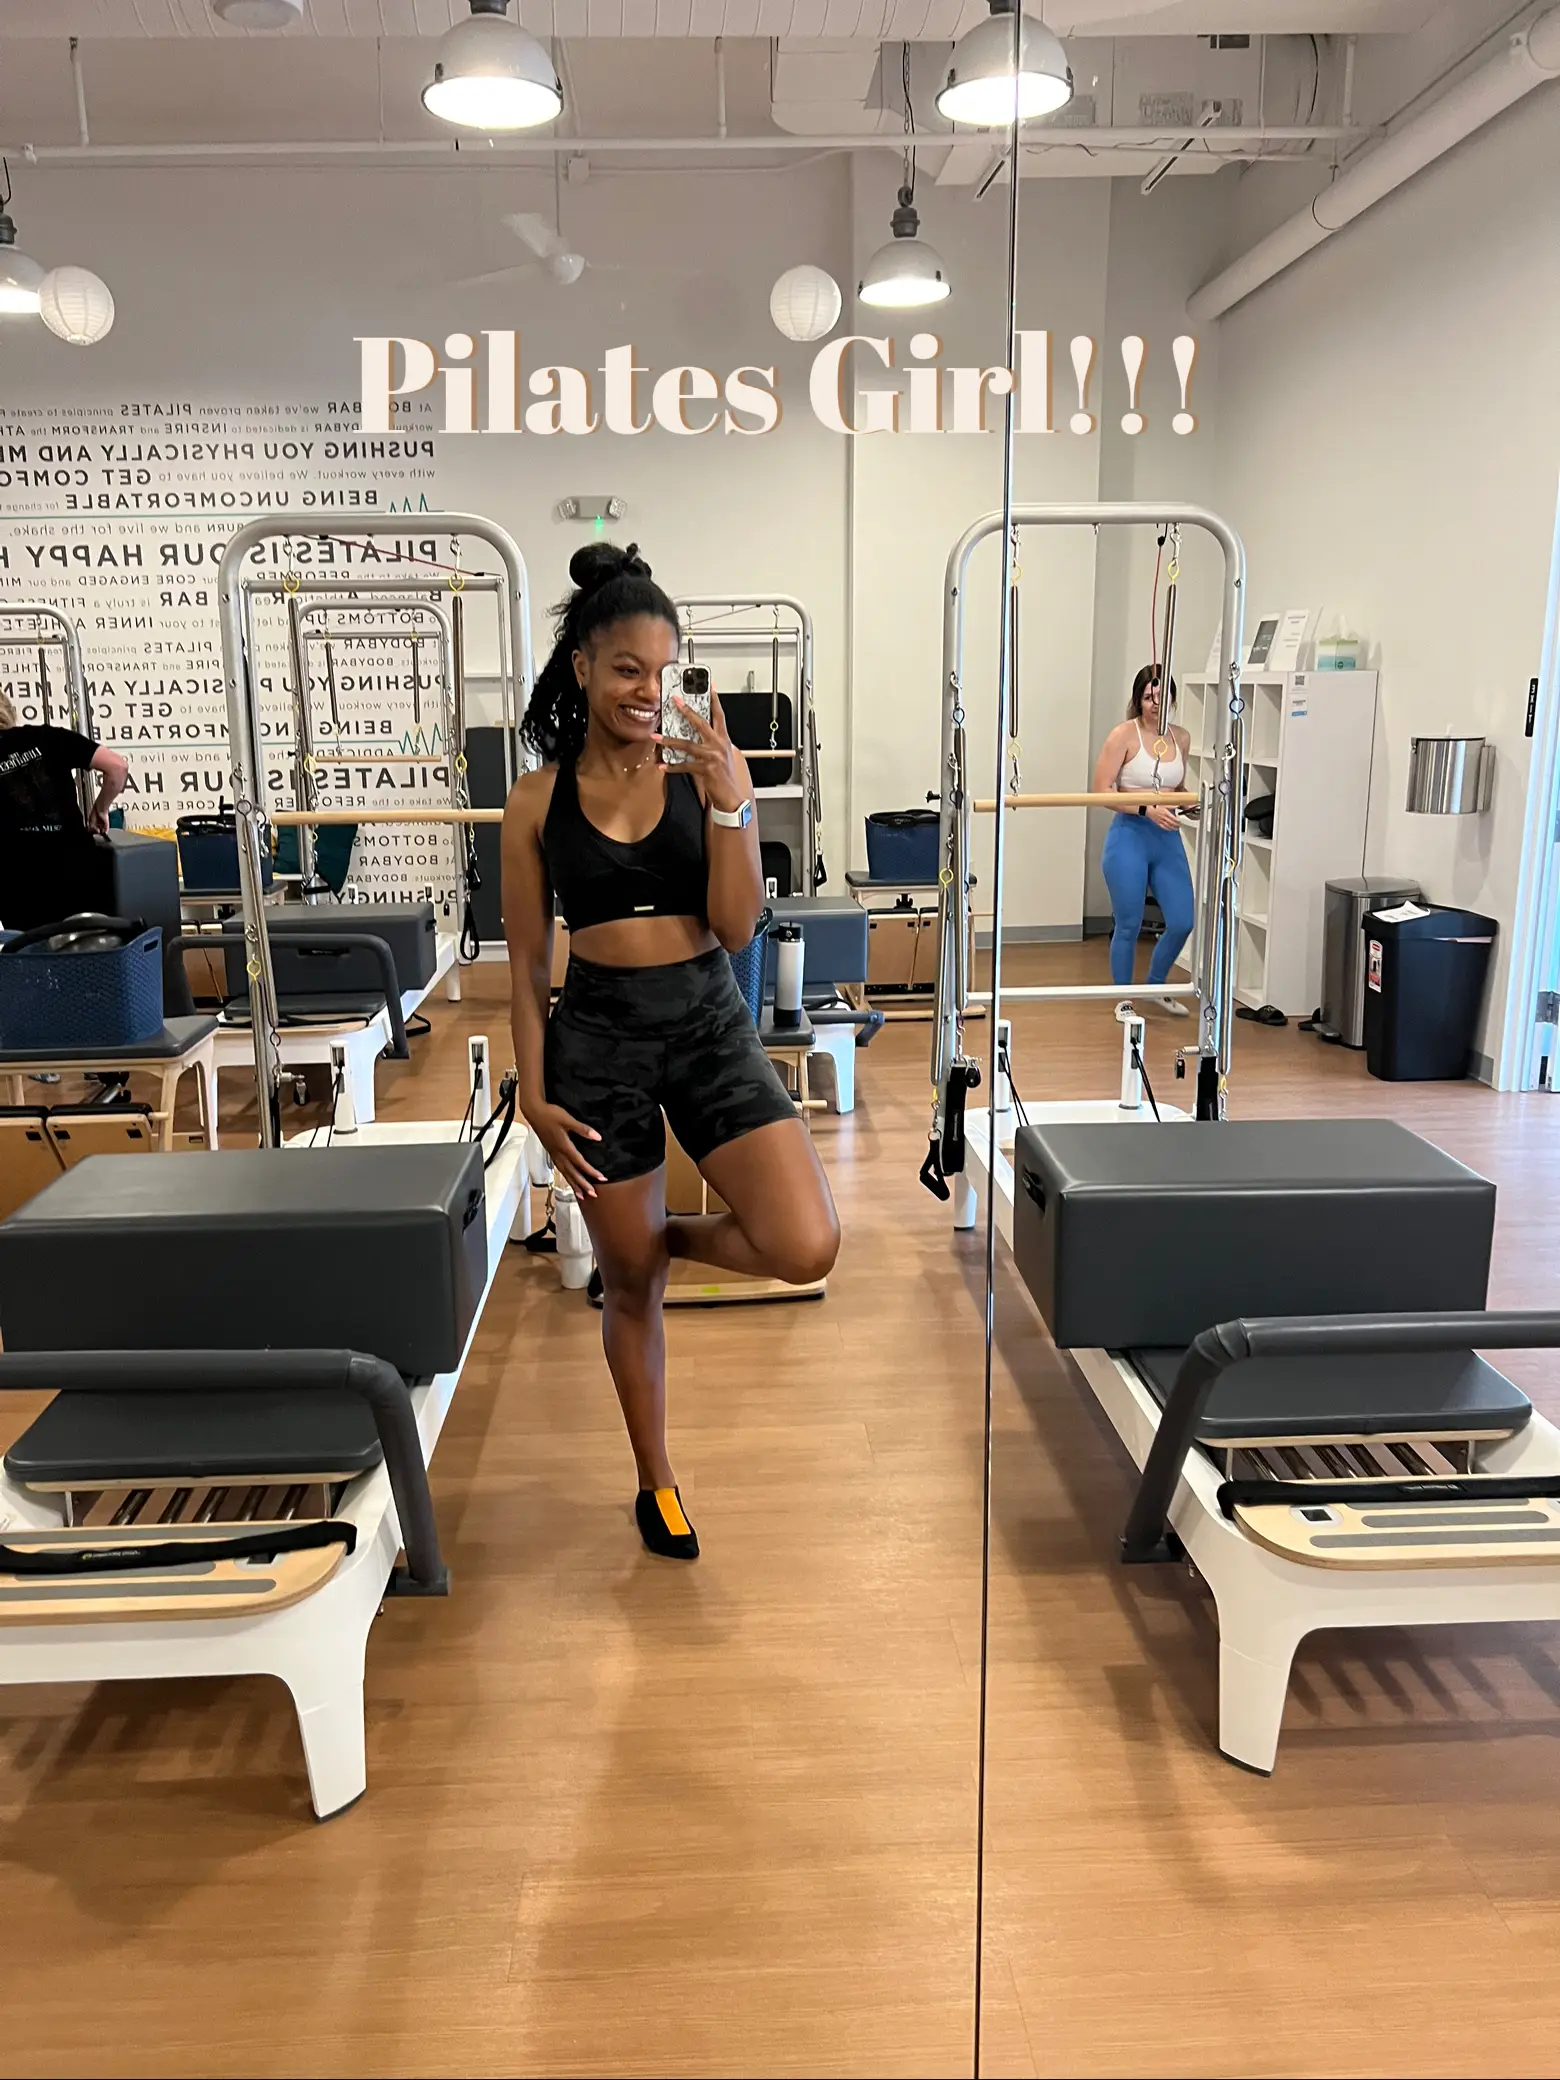 Avea Pilates. – Highly Rated Reformer Studios with multiple NYC locations